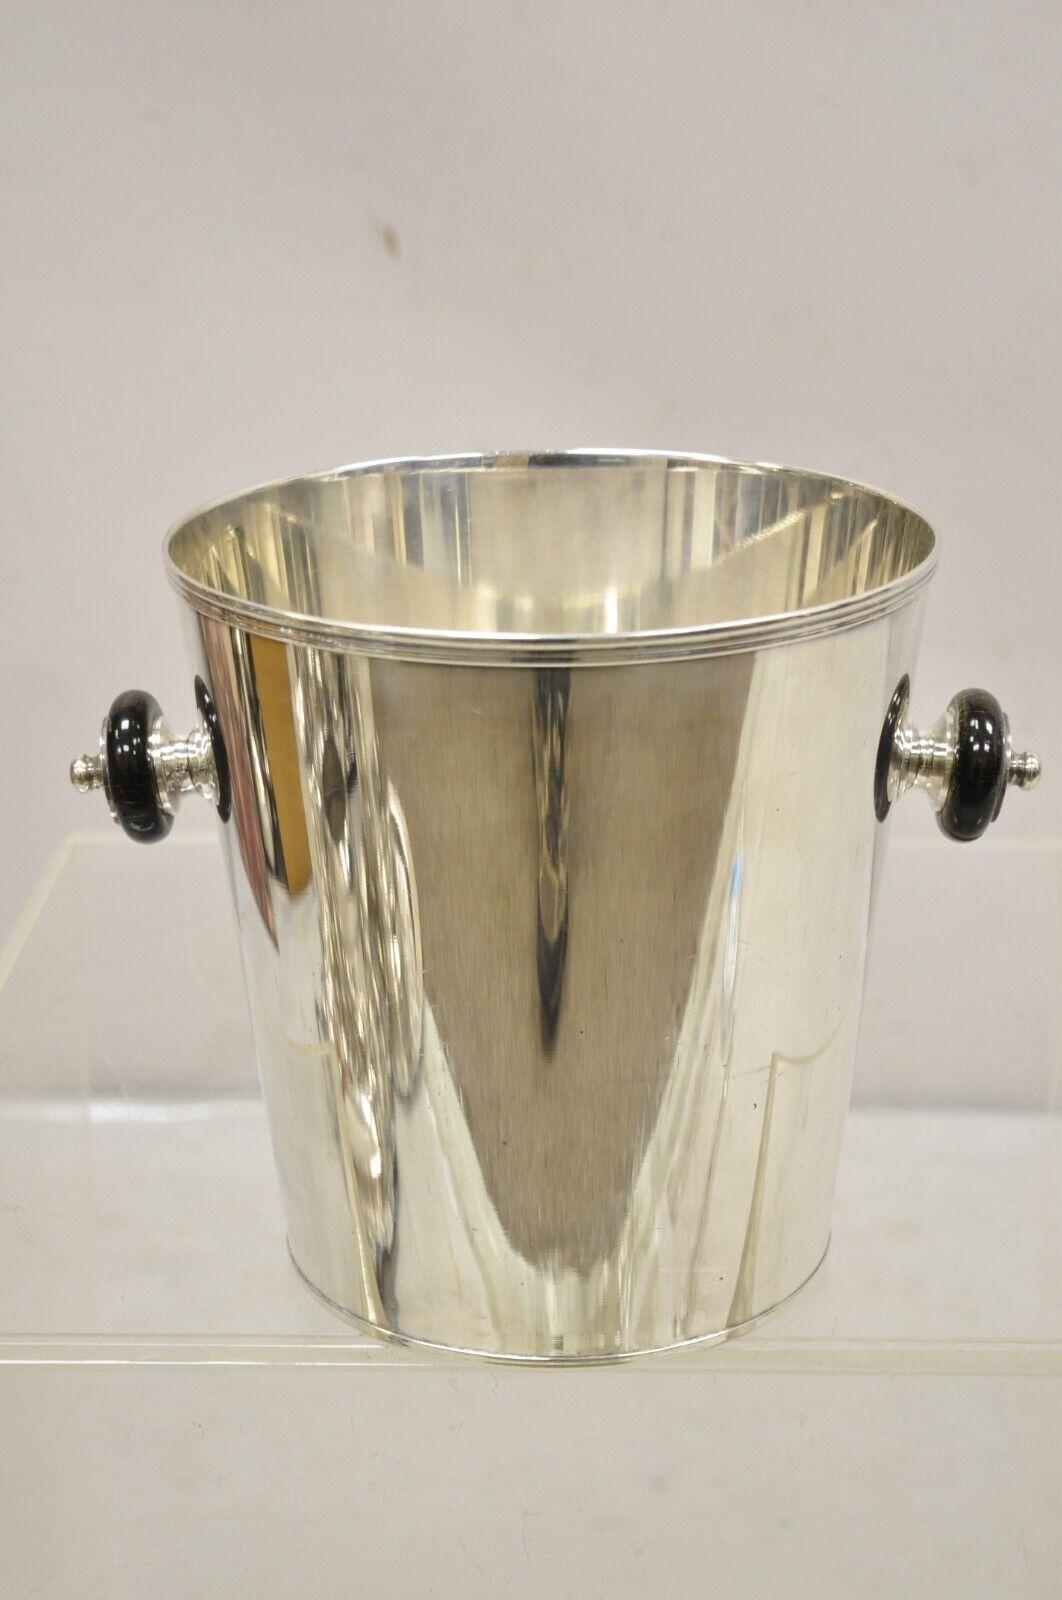 Vintage Italian Modern Silver Plated Champagne Chiller Ice Bucket with Wooden Handles. Circa 1960s. Measurements: 8.25